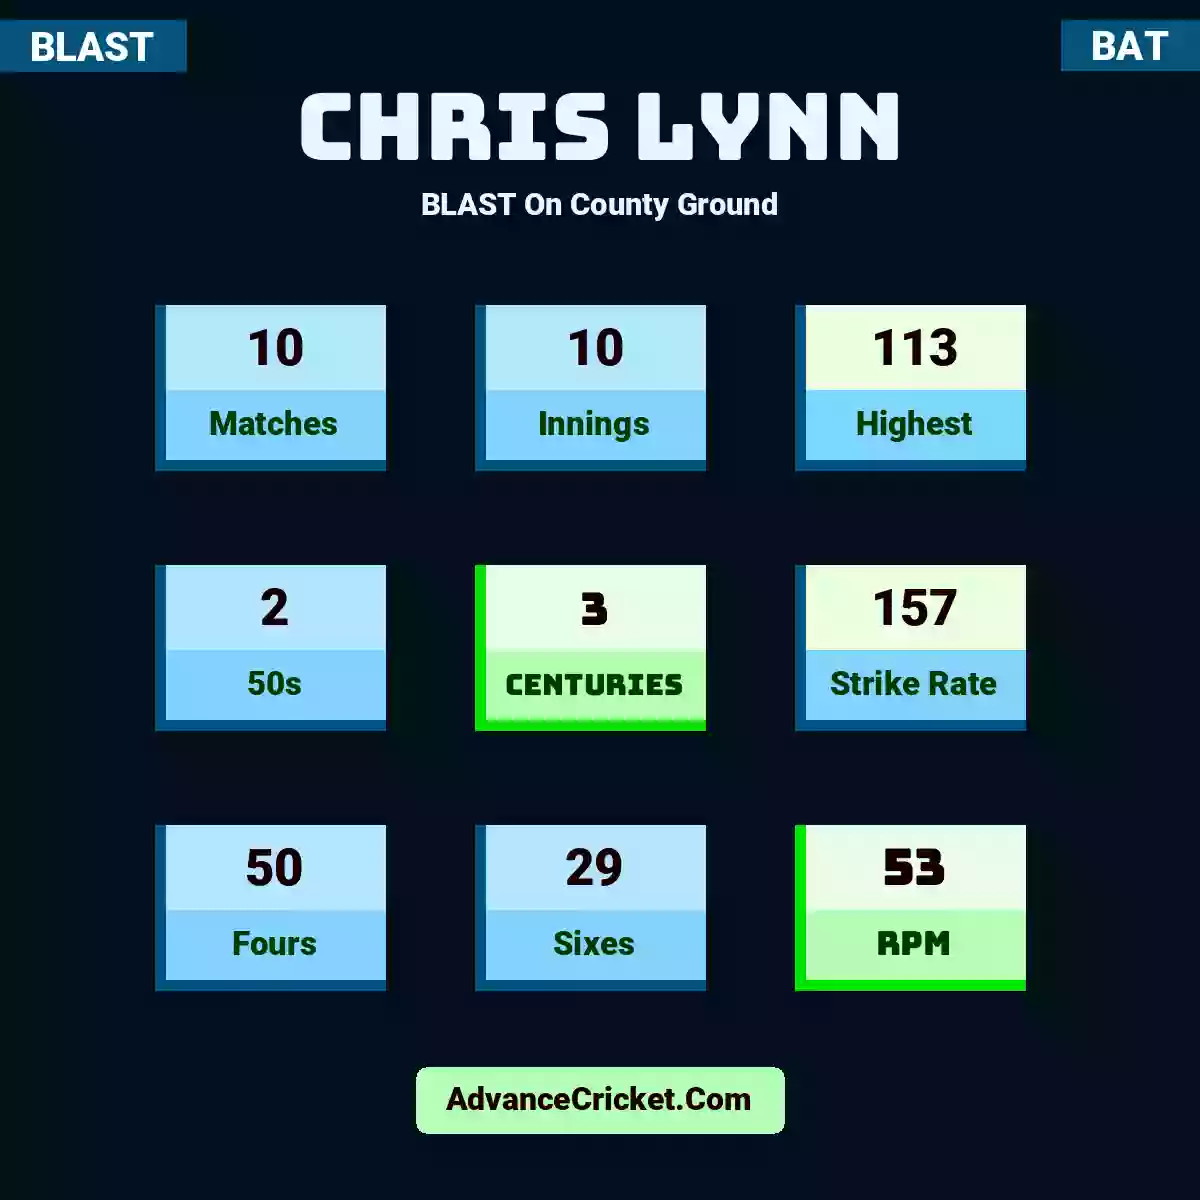 Chris Lynn BLAST  On County Ground, Chris Lynn played 10 matches, scored 113 runs as highest, 2 half-centuries, and 3 centuries, with a strike rate of 157. C.Lynn hit 50 fours and 29 sixes, with an RPM of 53.